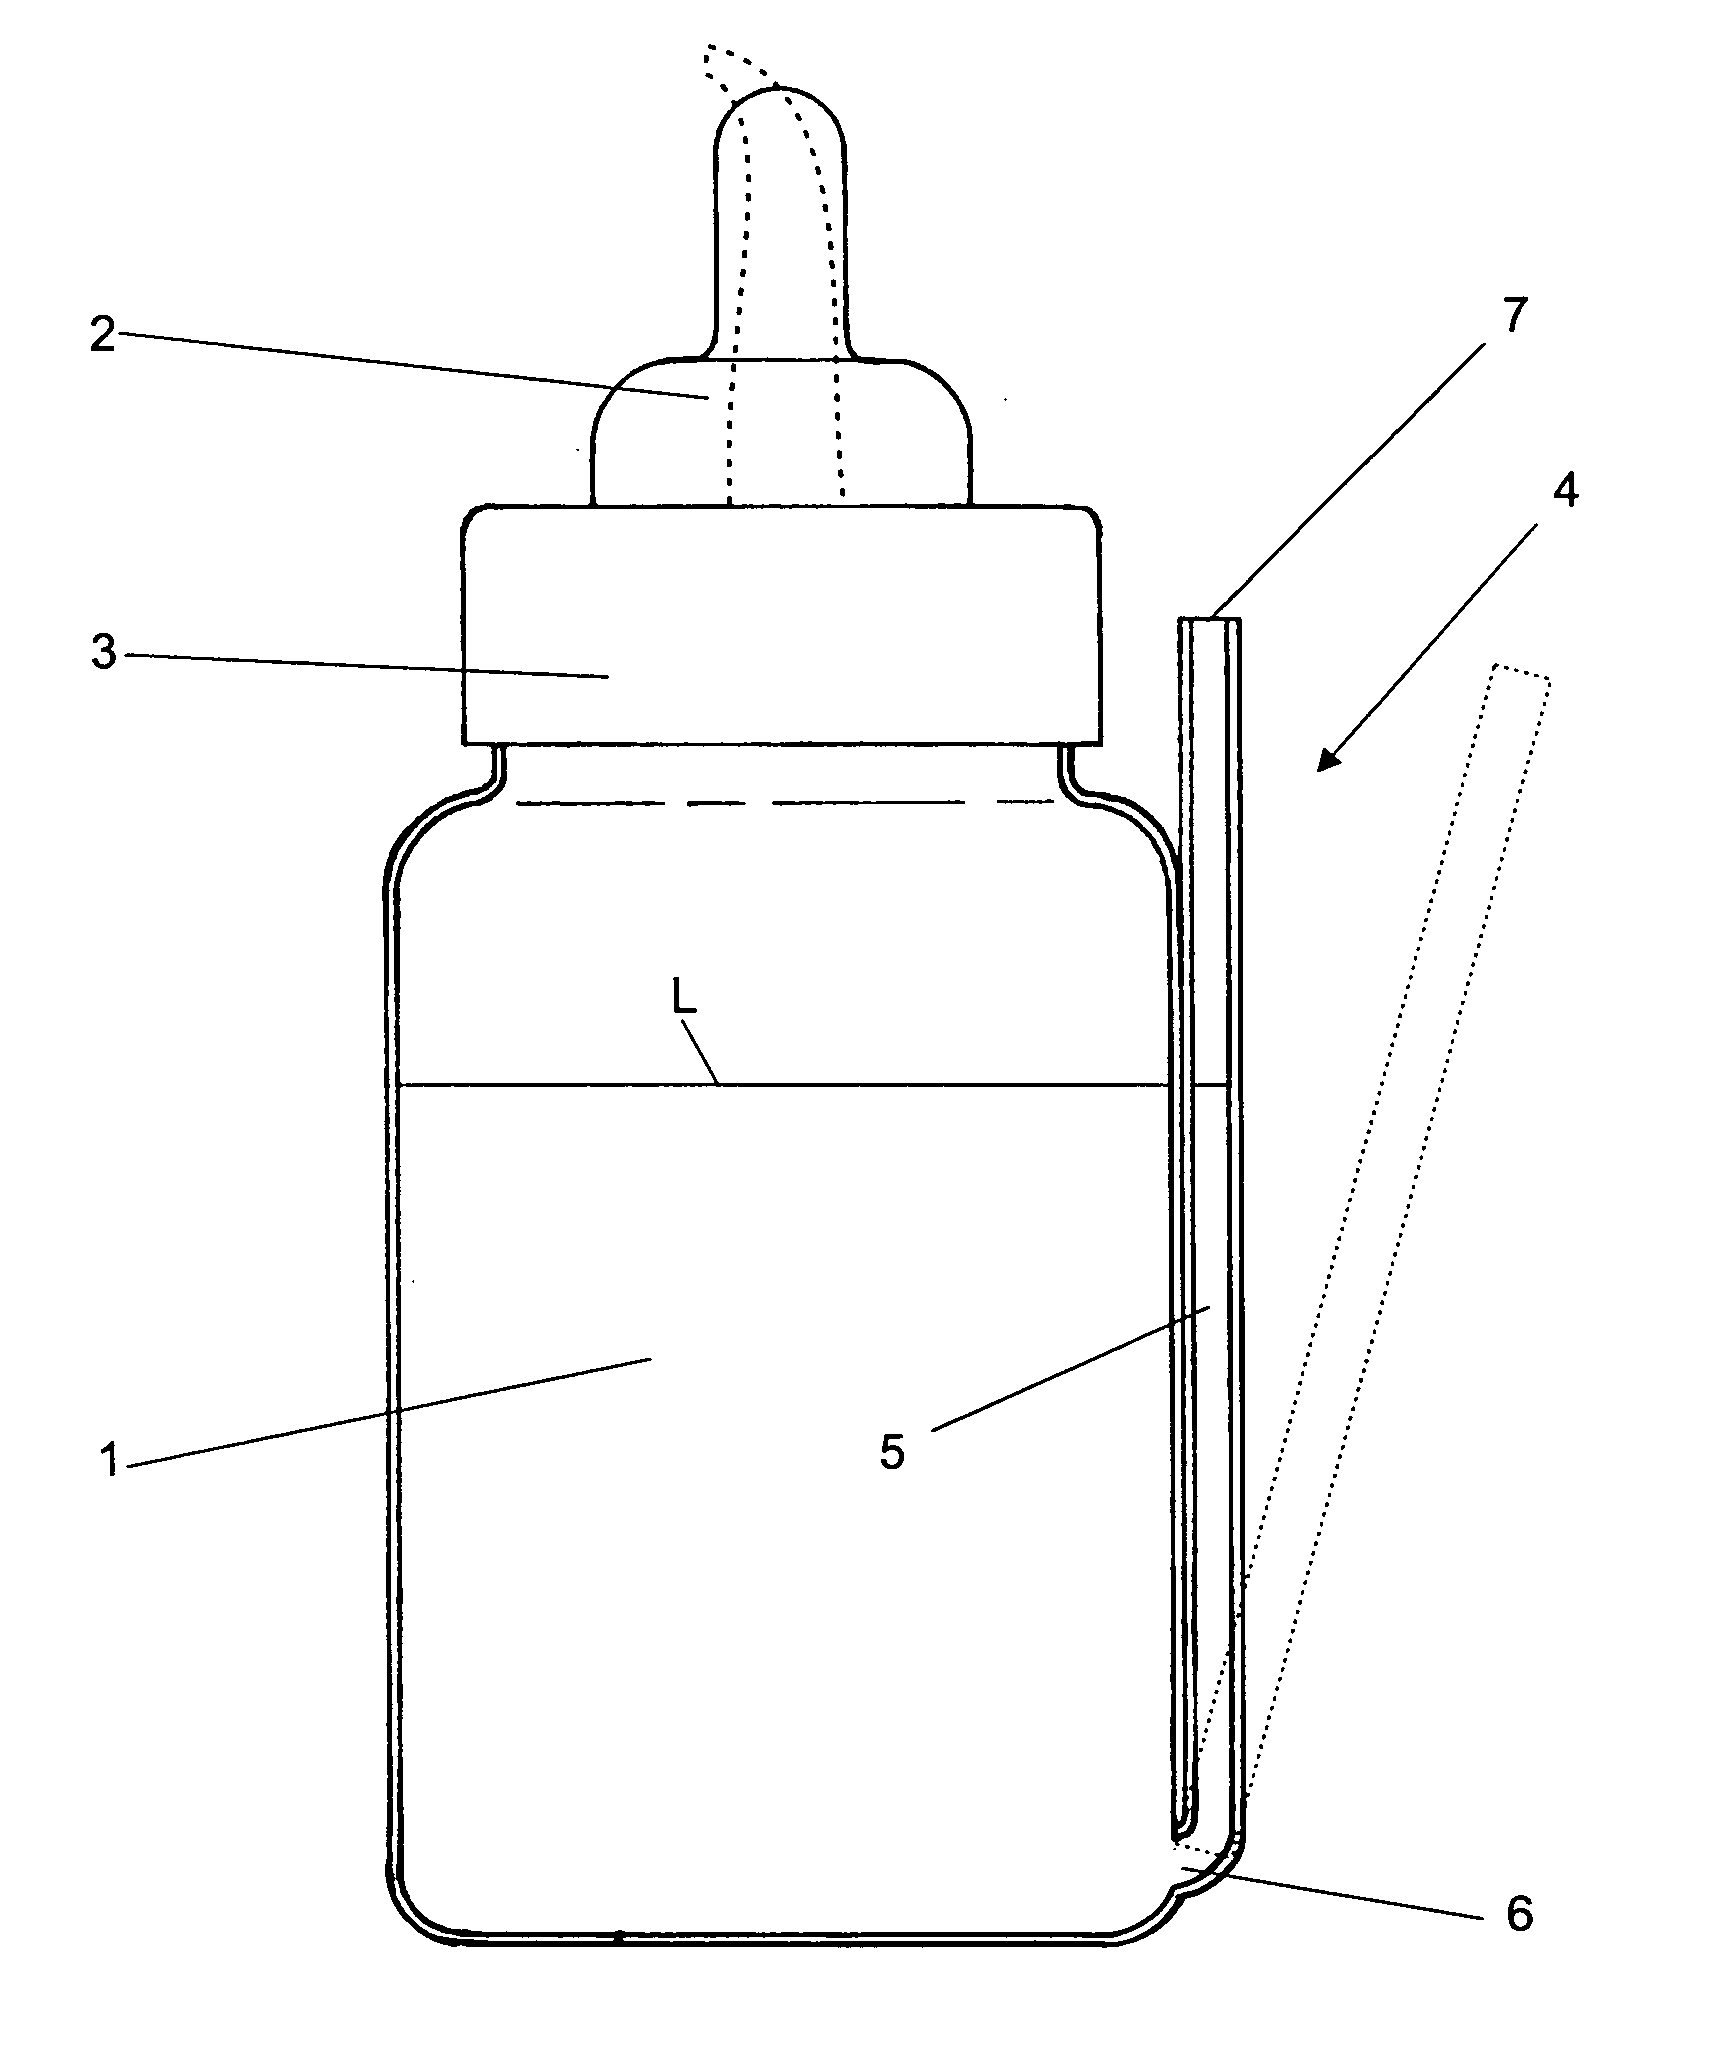 Air vent for liquid containers, based on the principle of communicating vessels